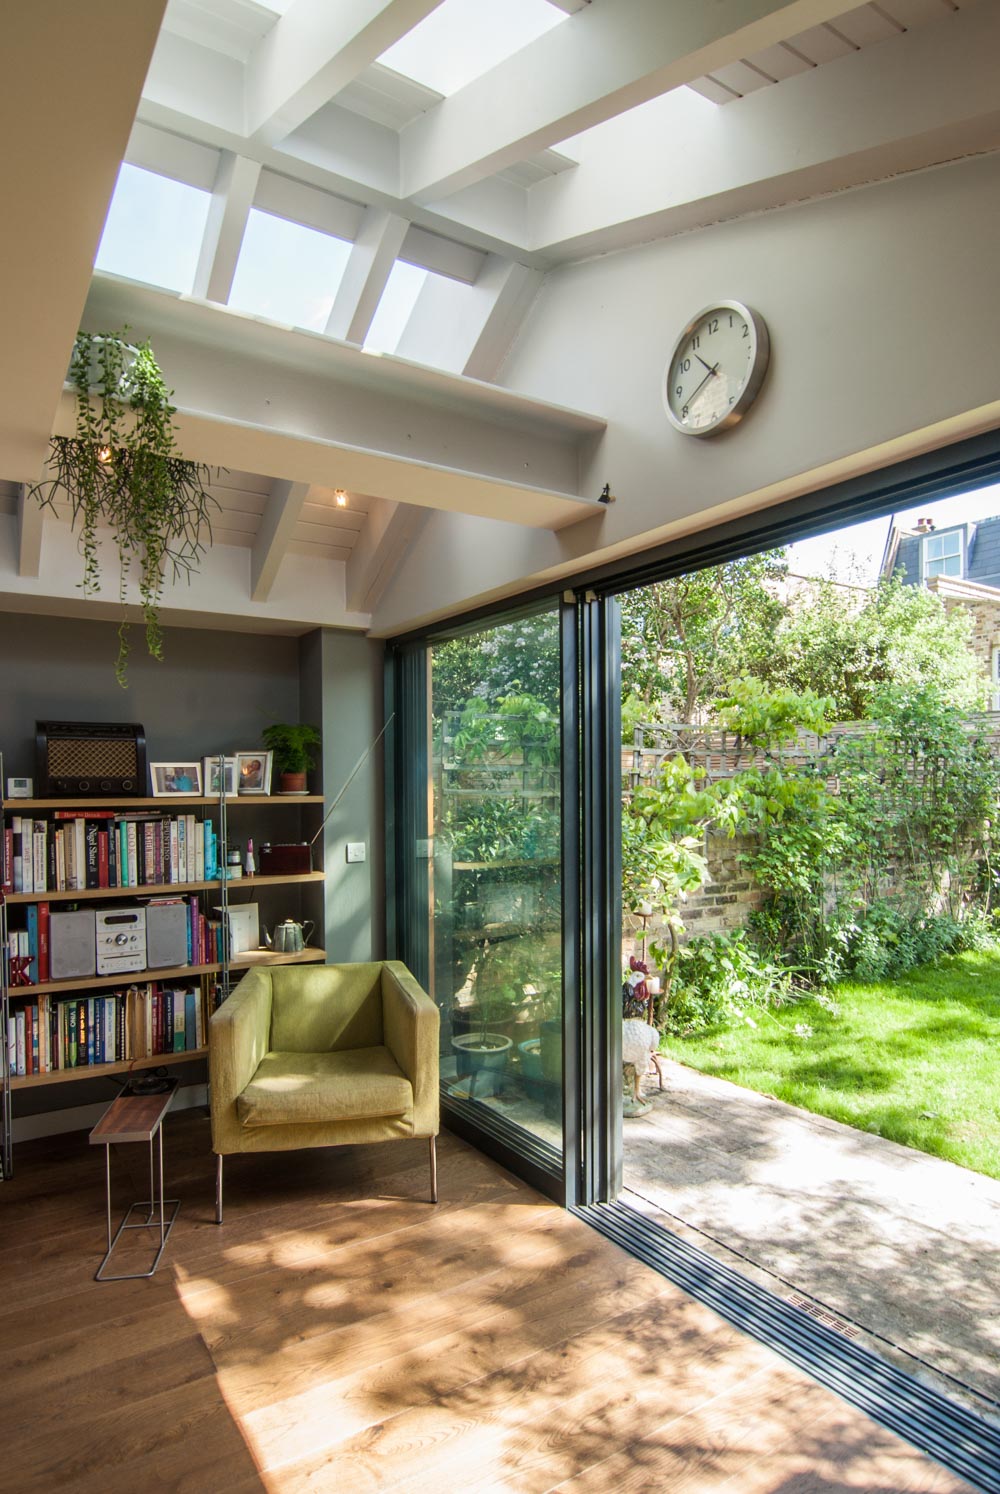 Roof lights overlooking a peaceful reading corner next to the scenic garden view.